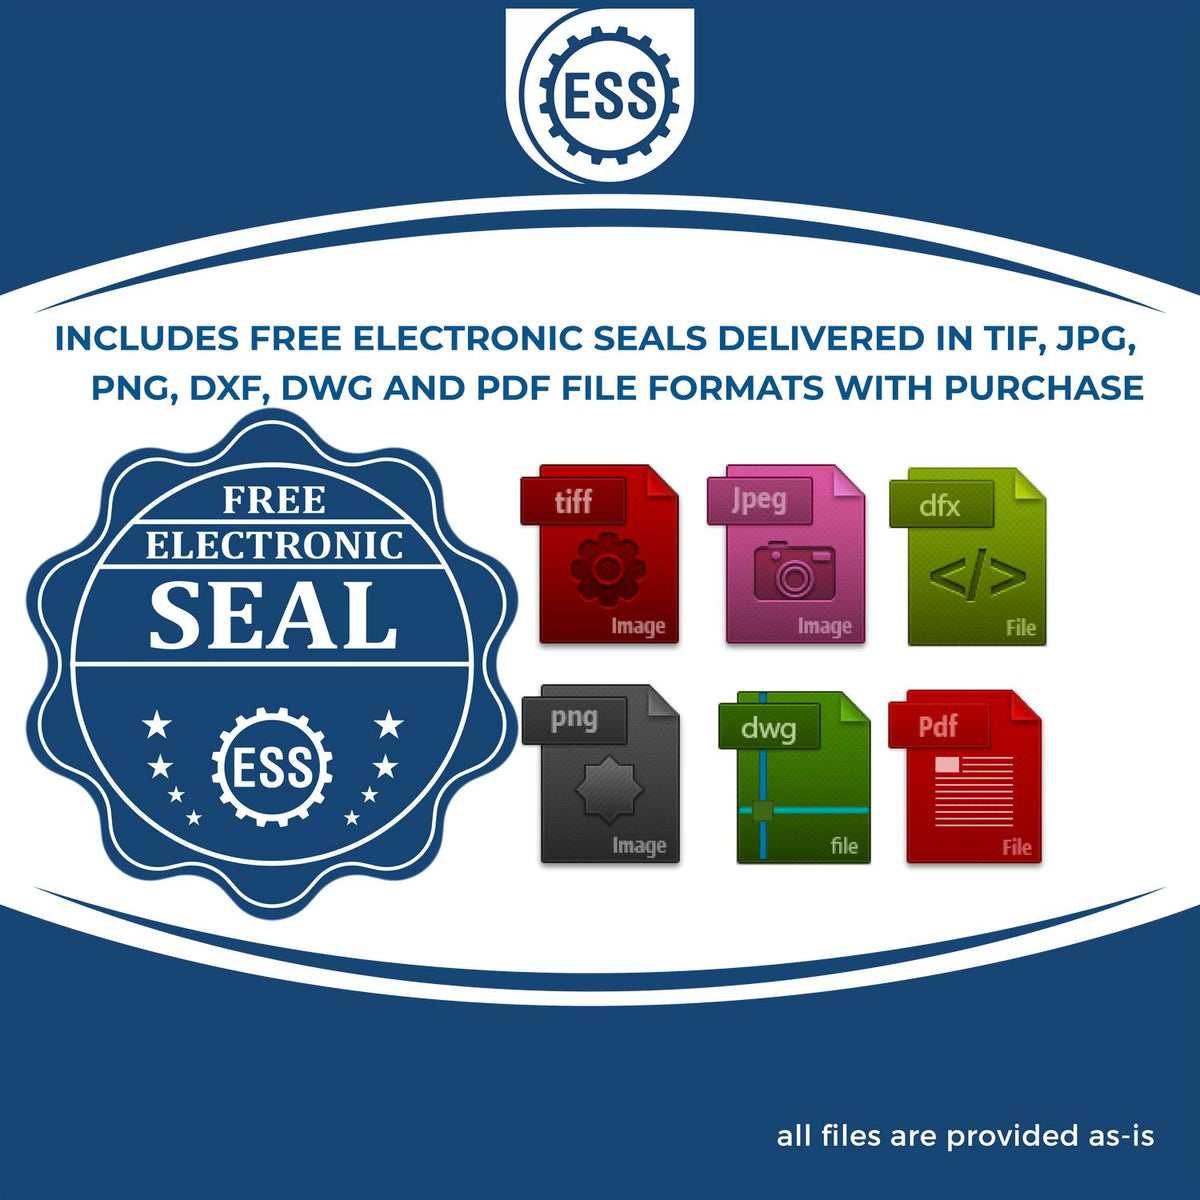 An infographic for the free electronic seal for the State of Georgia Long Reach Architectural Embossing Seal illustrating the different file type icons such as DXF, DWG, TIF, JPG and PNG.